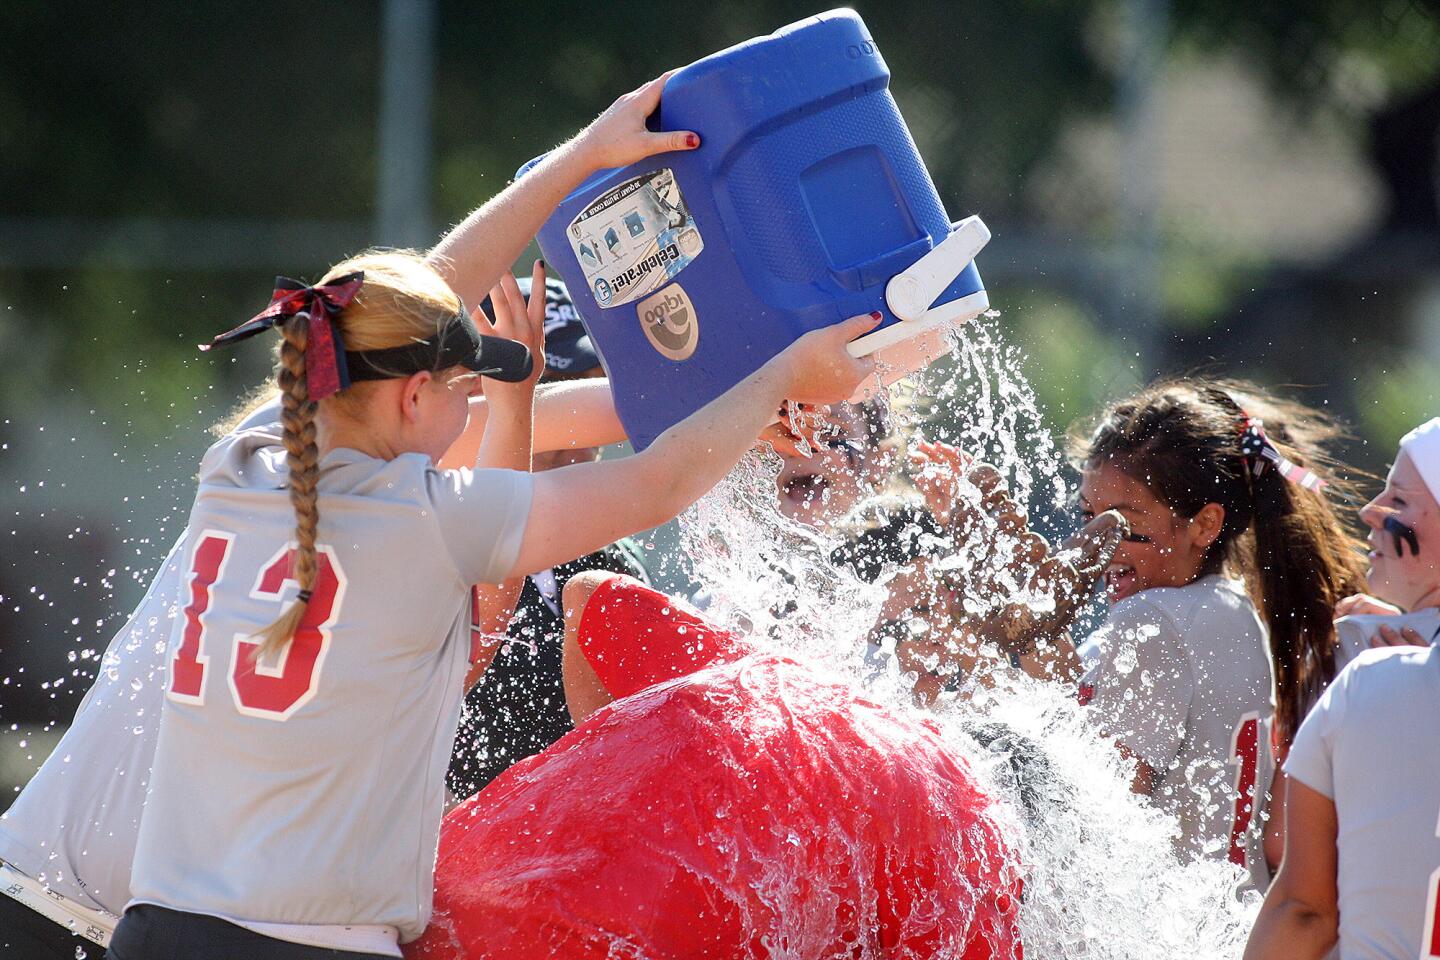 Glendale's head coach Gregory Martin is under a cold shower of ice water his team dumped on him after beating Hoover in a Pacific League softball game at Glendale High School on Thursday, May 15, 2014. Glendale won in 4 1/2 innings 10-0.